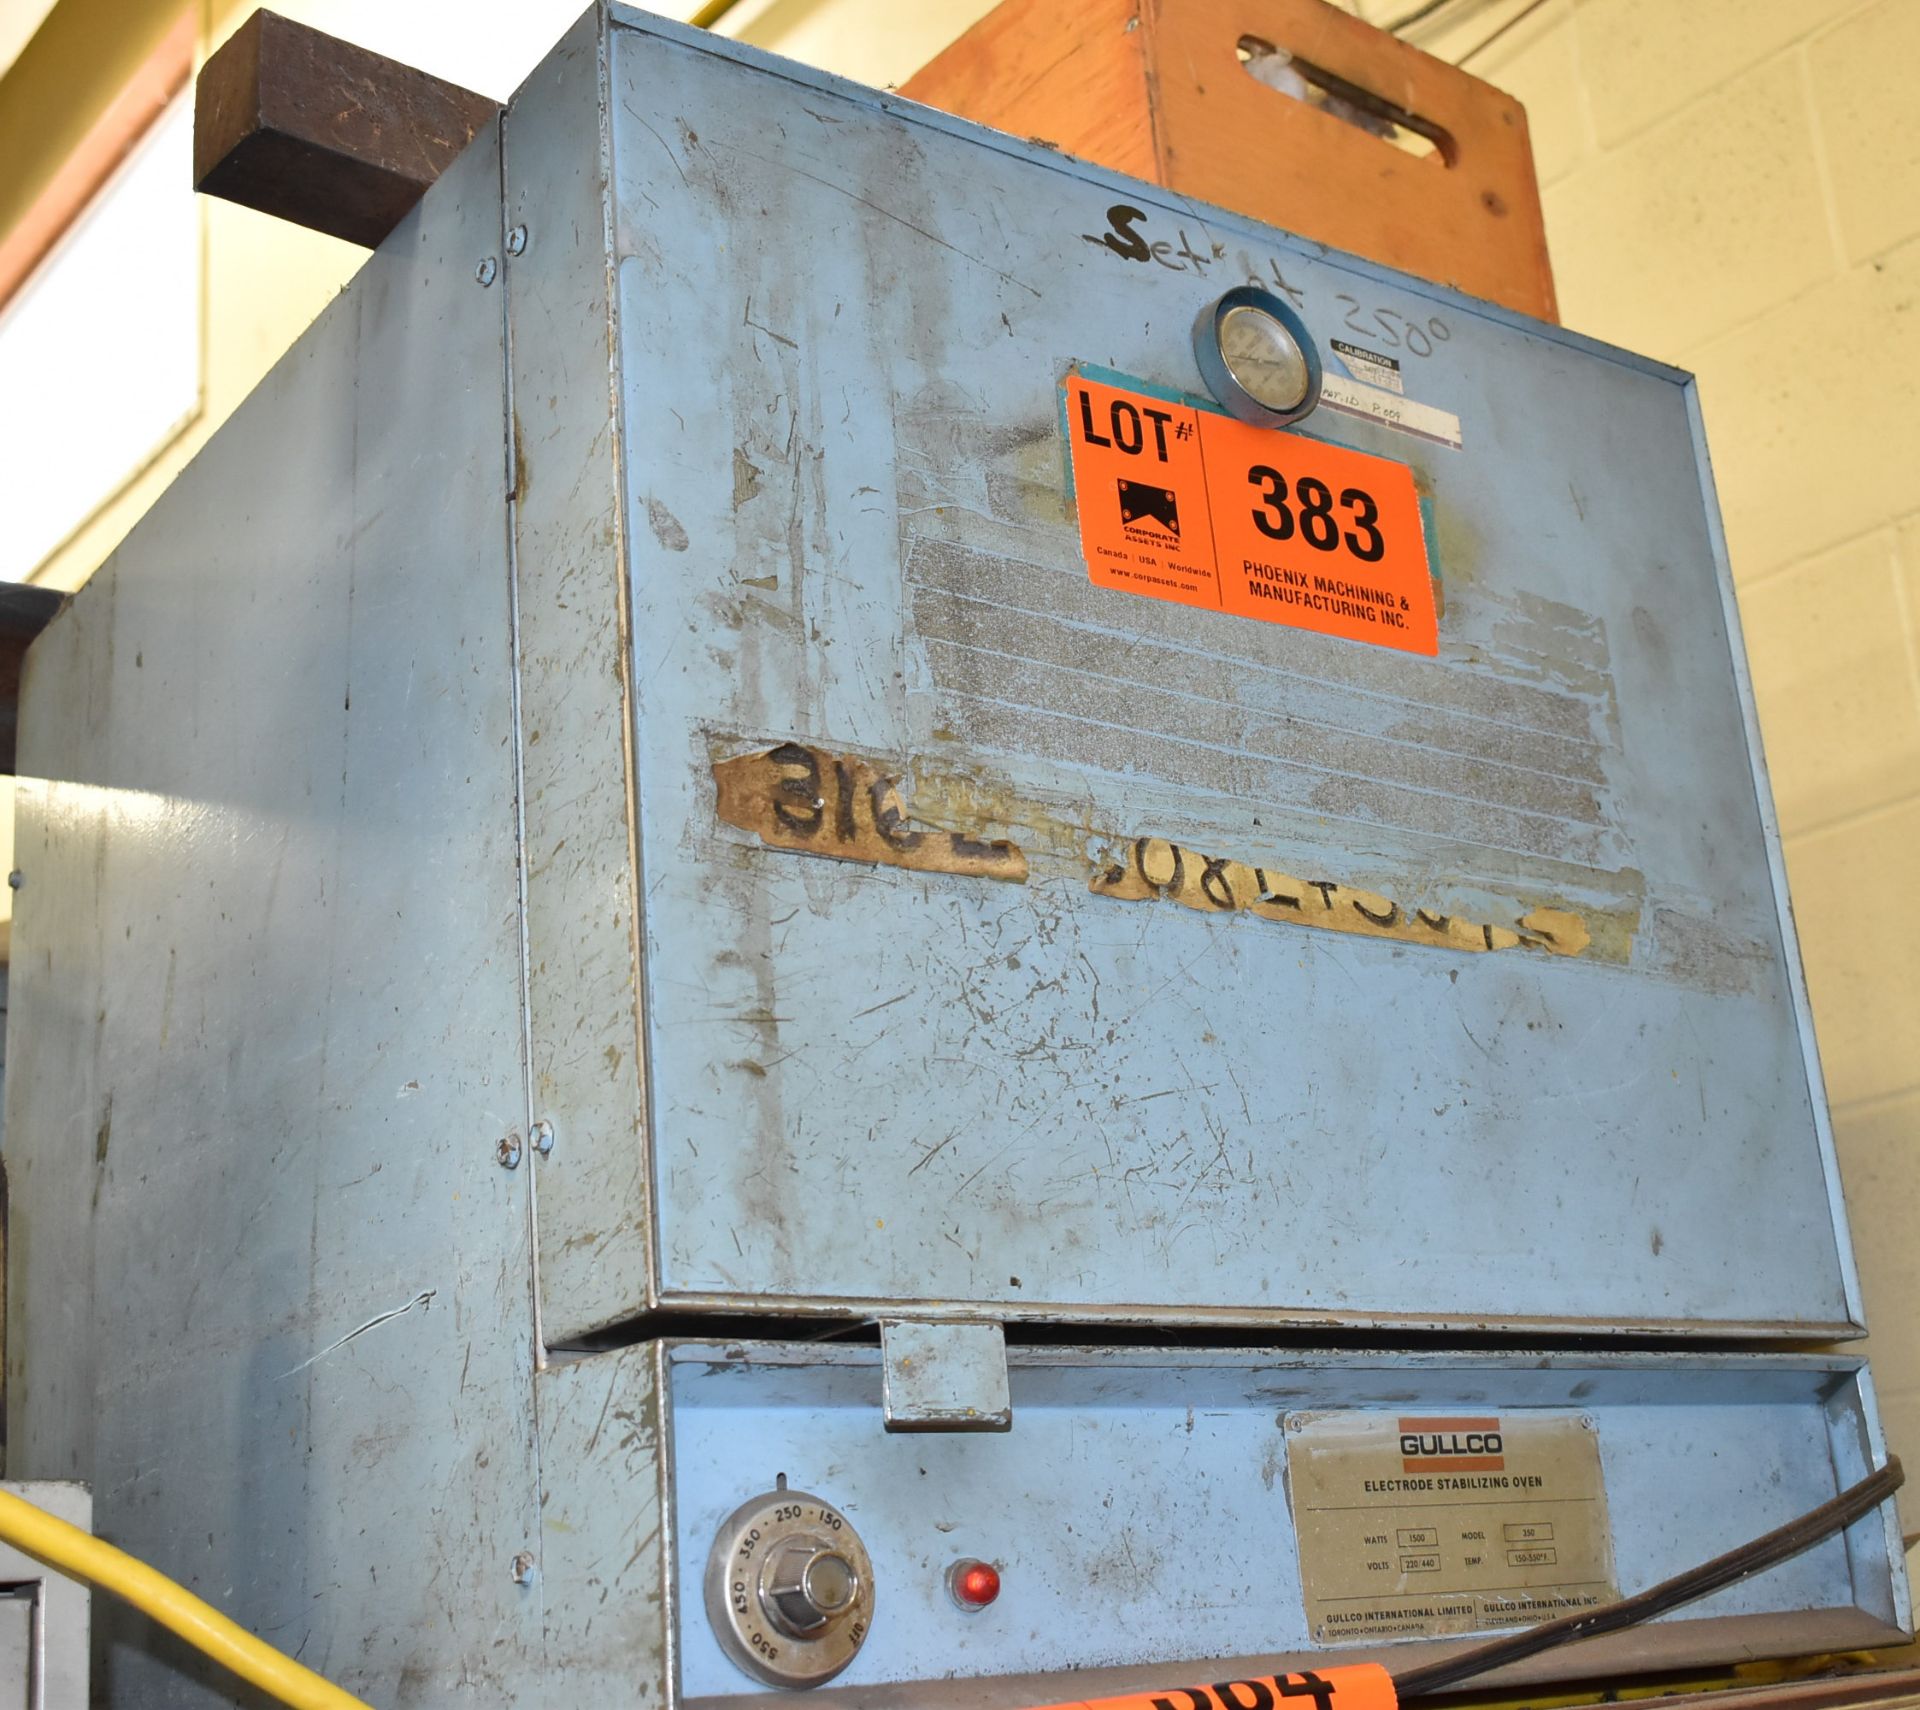 GULLCO MODEL 350 ELECTRODE STABILIZING OVEN WITH 550 DEG. F. MAX. TEMPERATURE, S/N: S/N